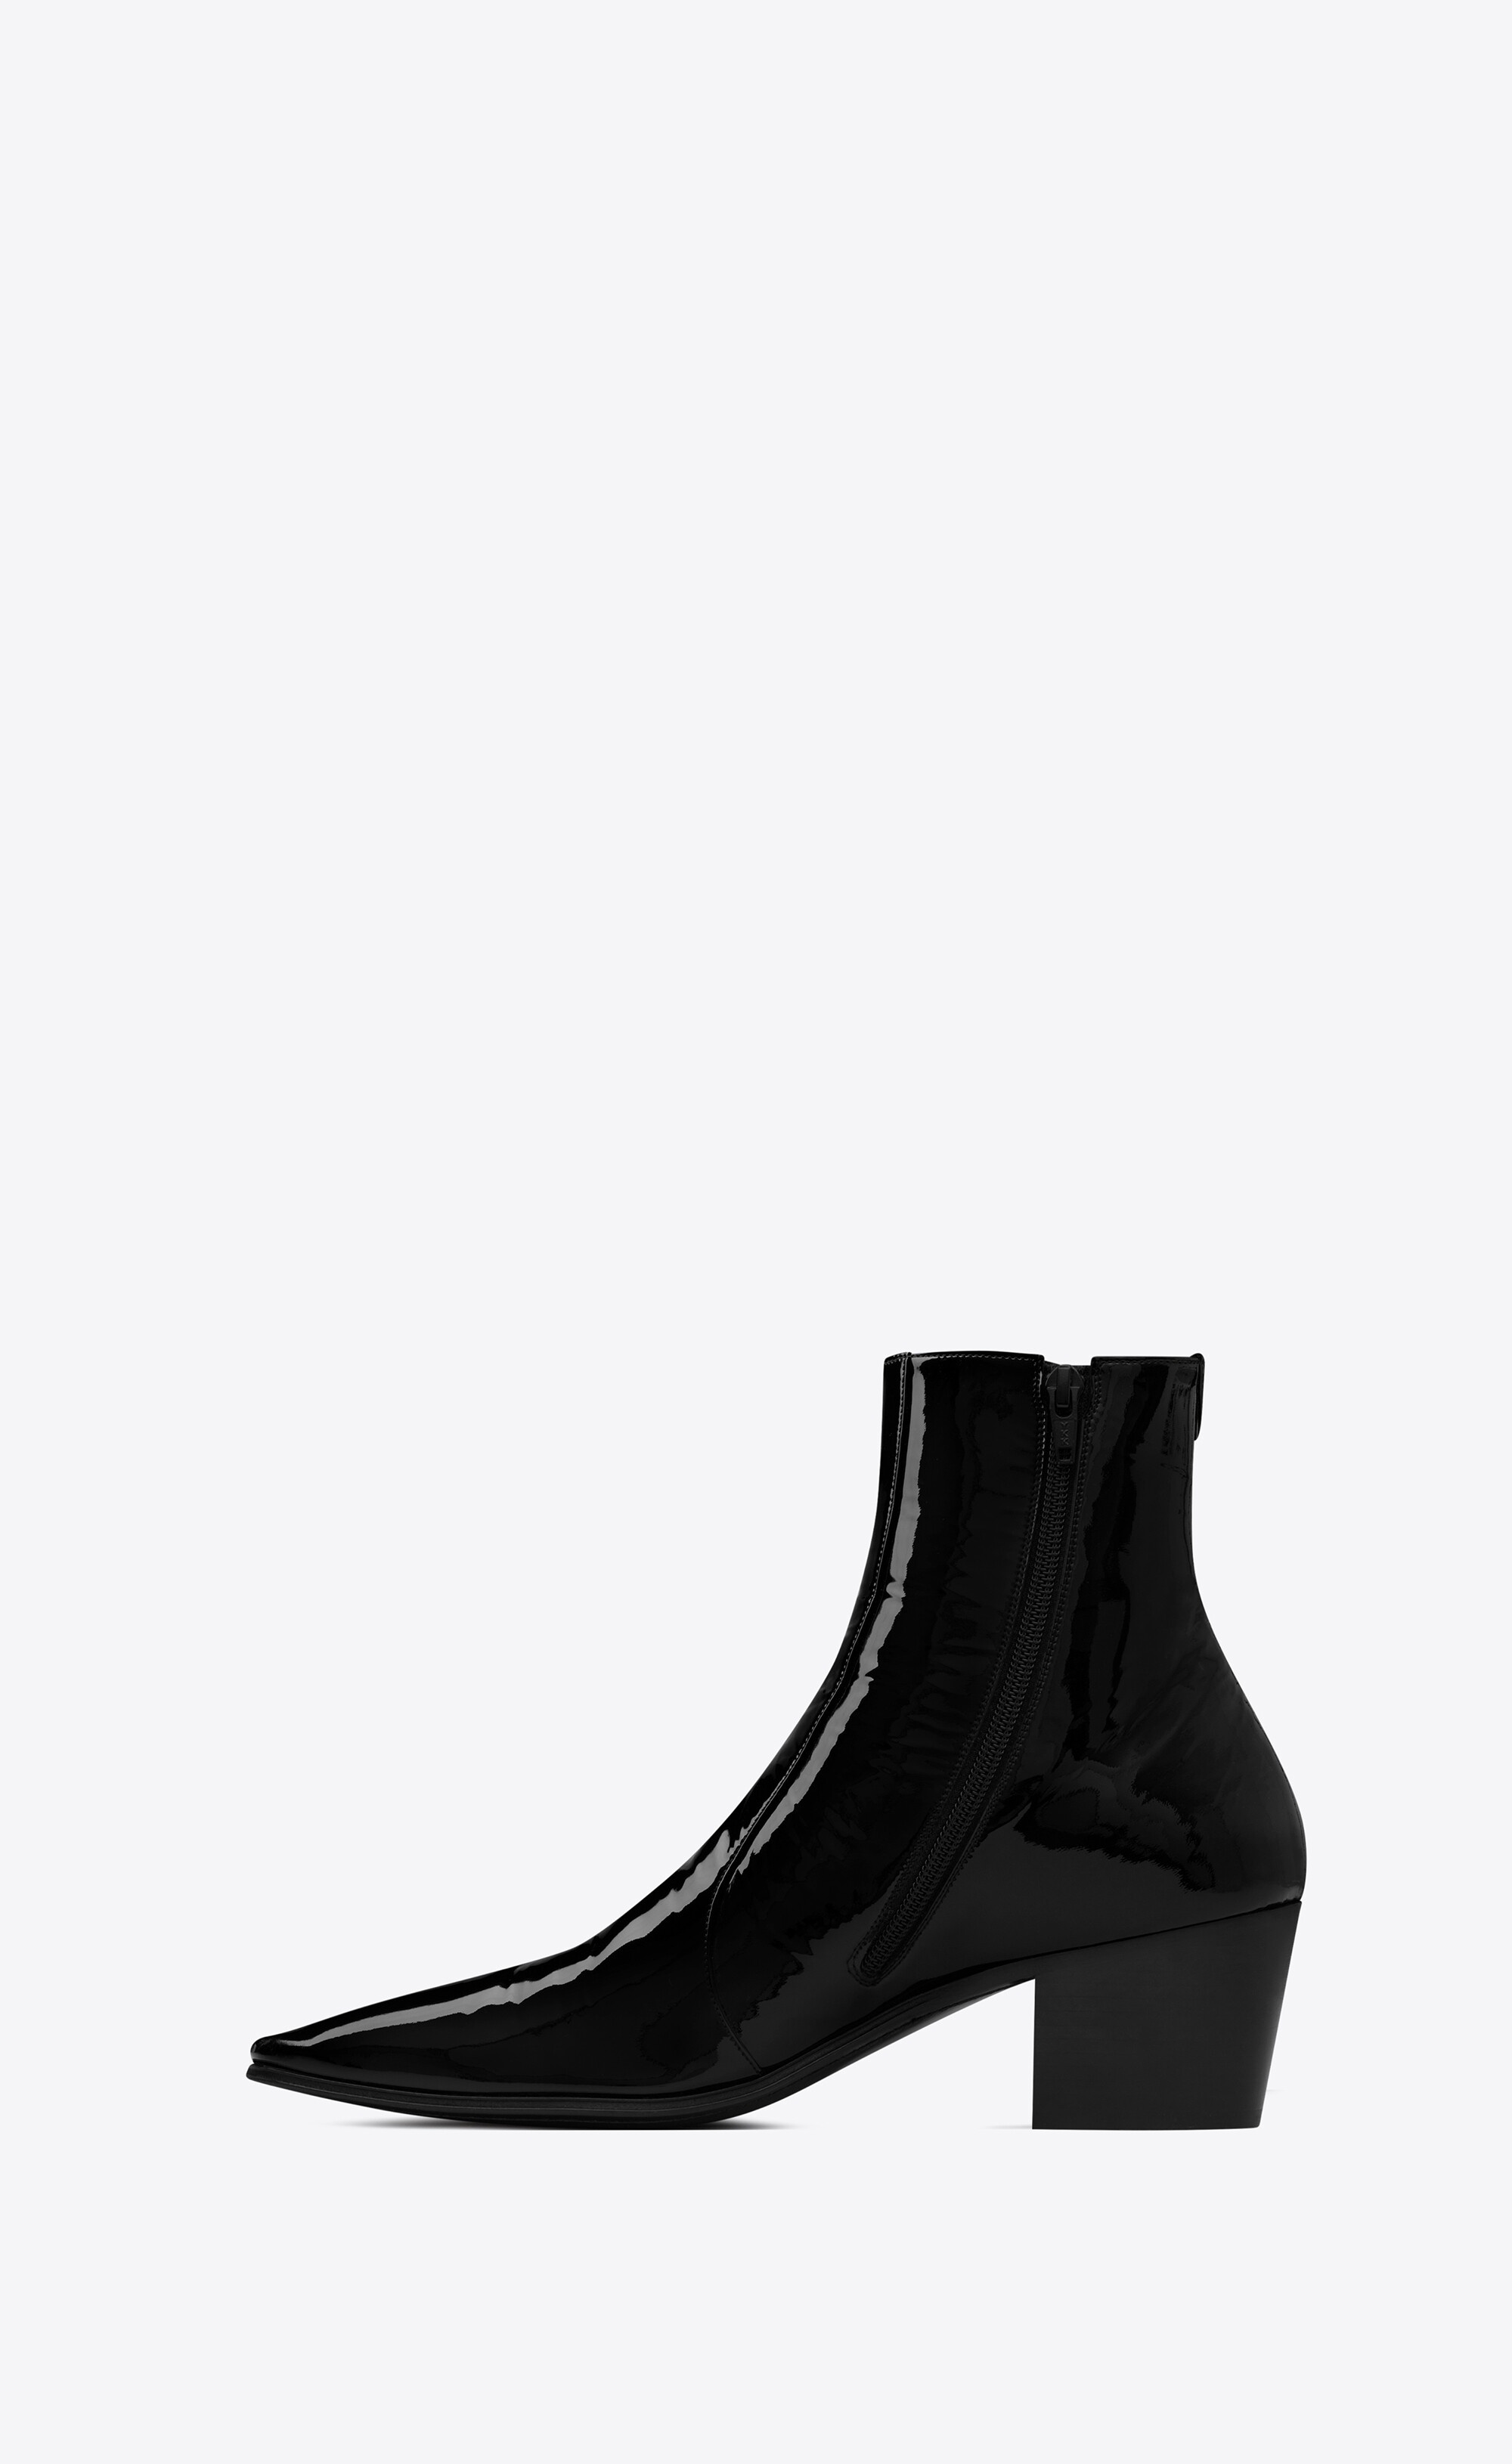 vassili zipped boots in patent leather - 3